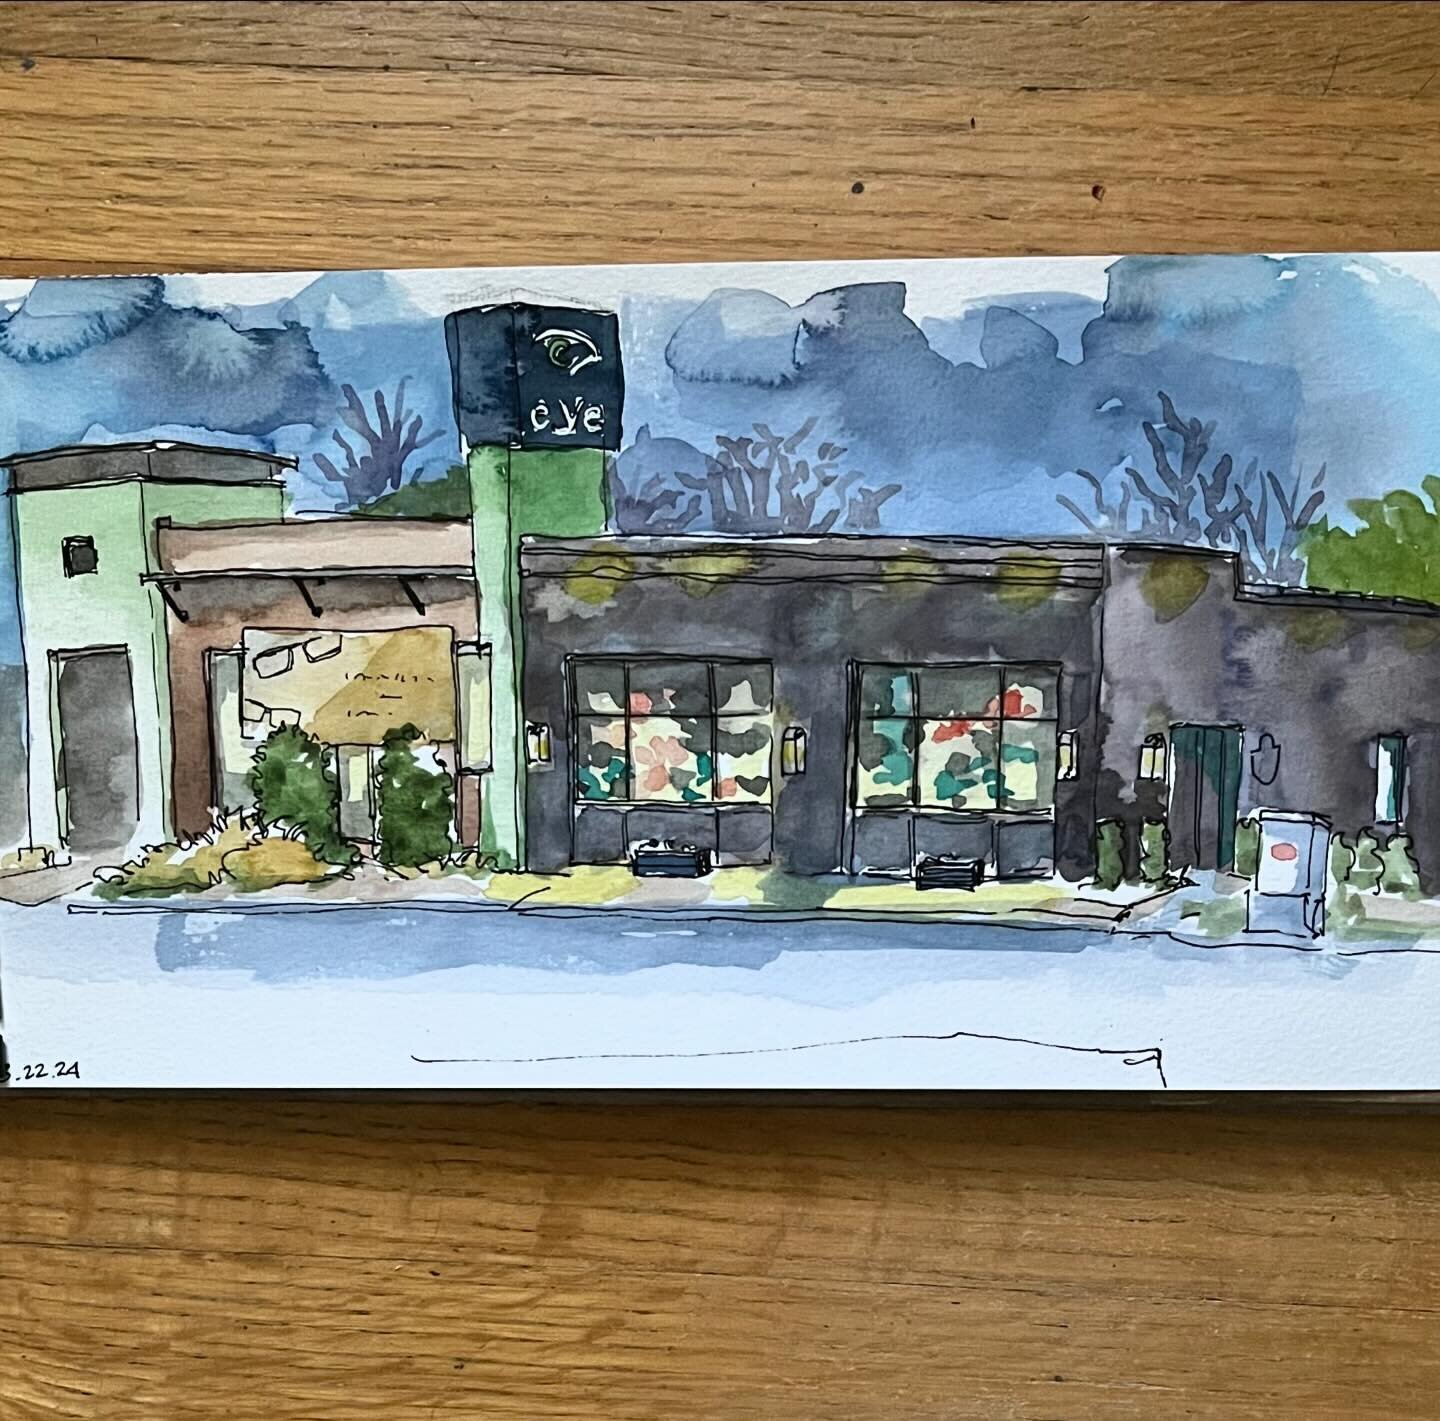 Another recent drawing of @paradoxatpeco and @eclecticeyememphis . I will be showing this and other works at Eclectic Eye this July. Stay tuned for details #urbansketchers #sketchbook #walktosee #sketchingnowbuildings #inkandwatercolour #inkandwash #